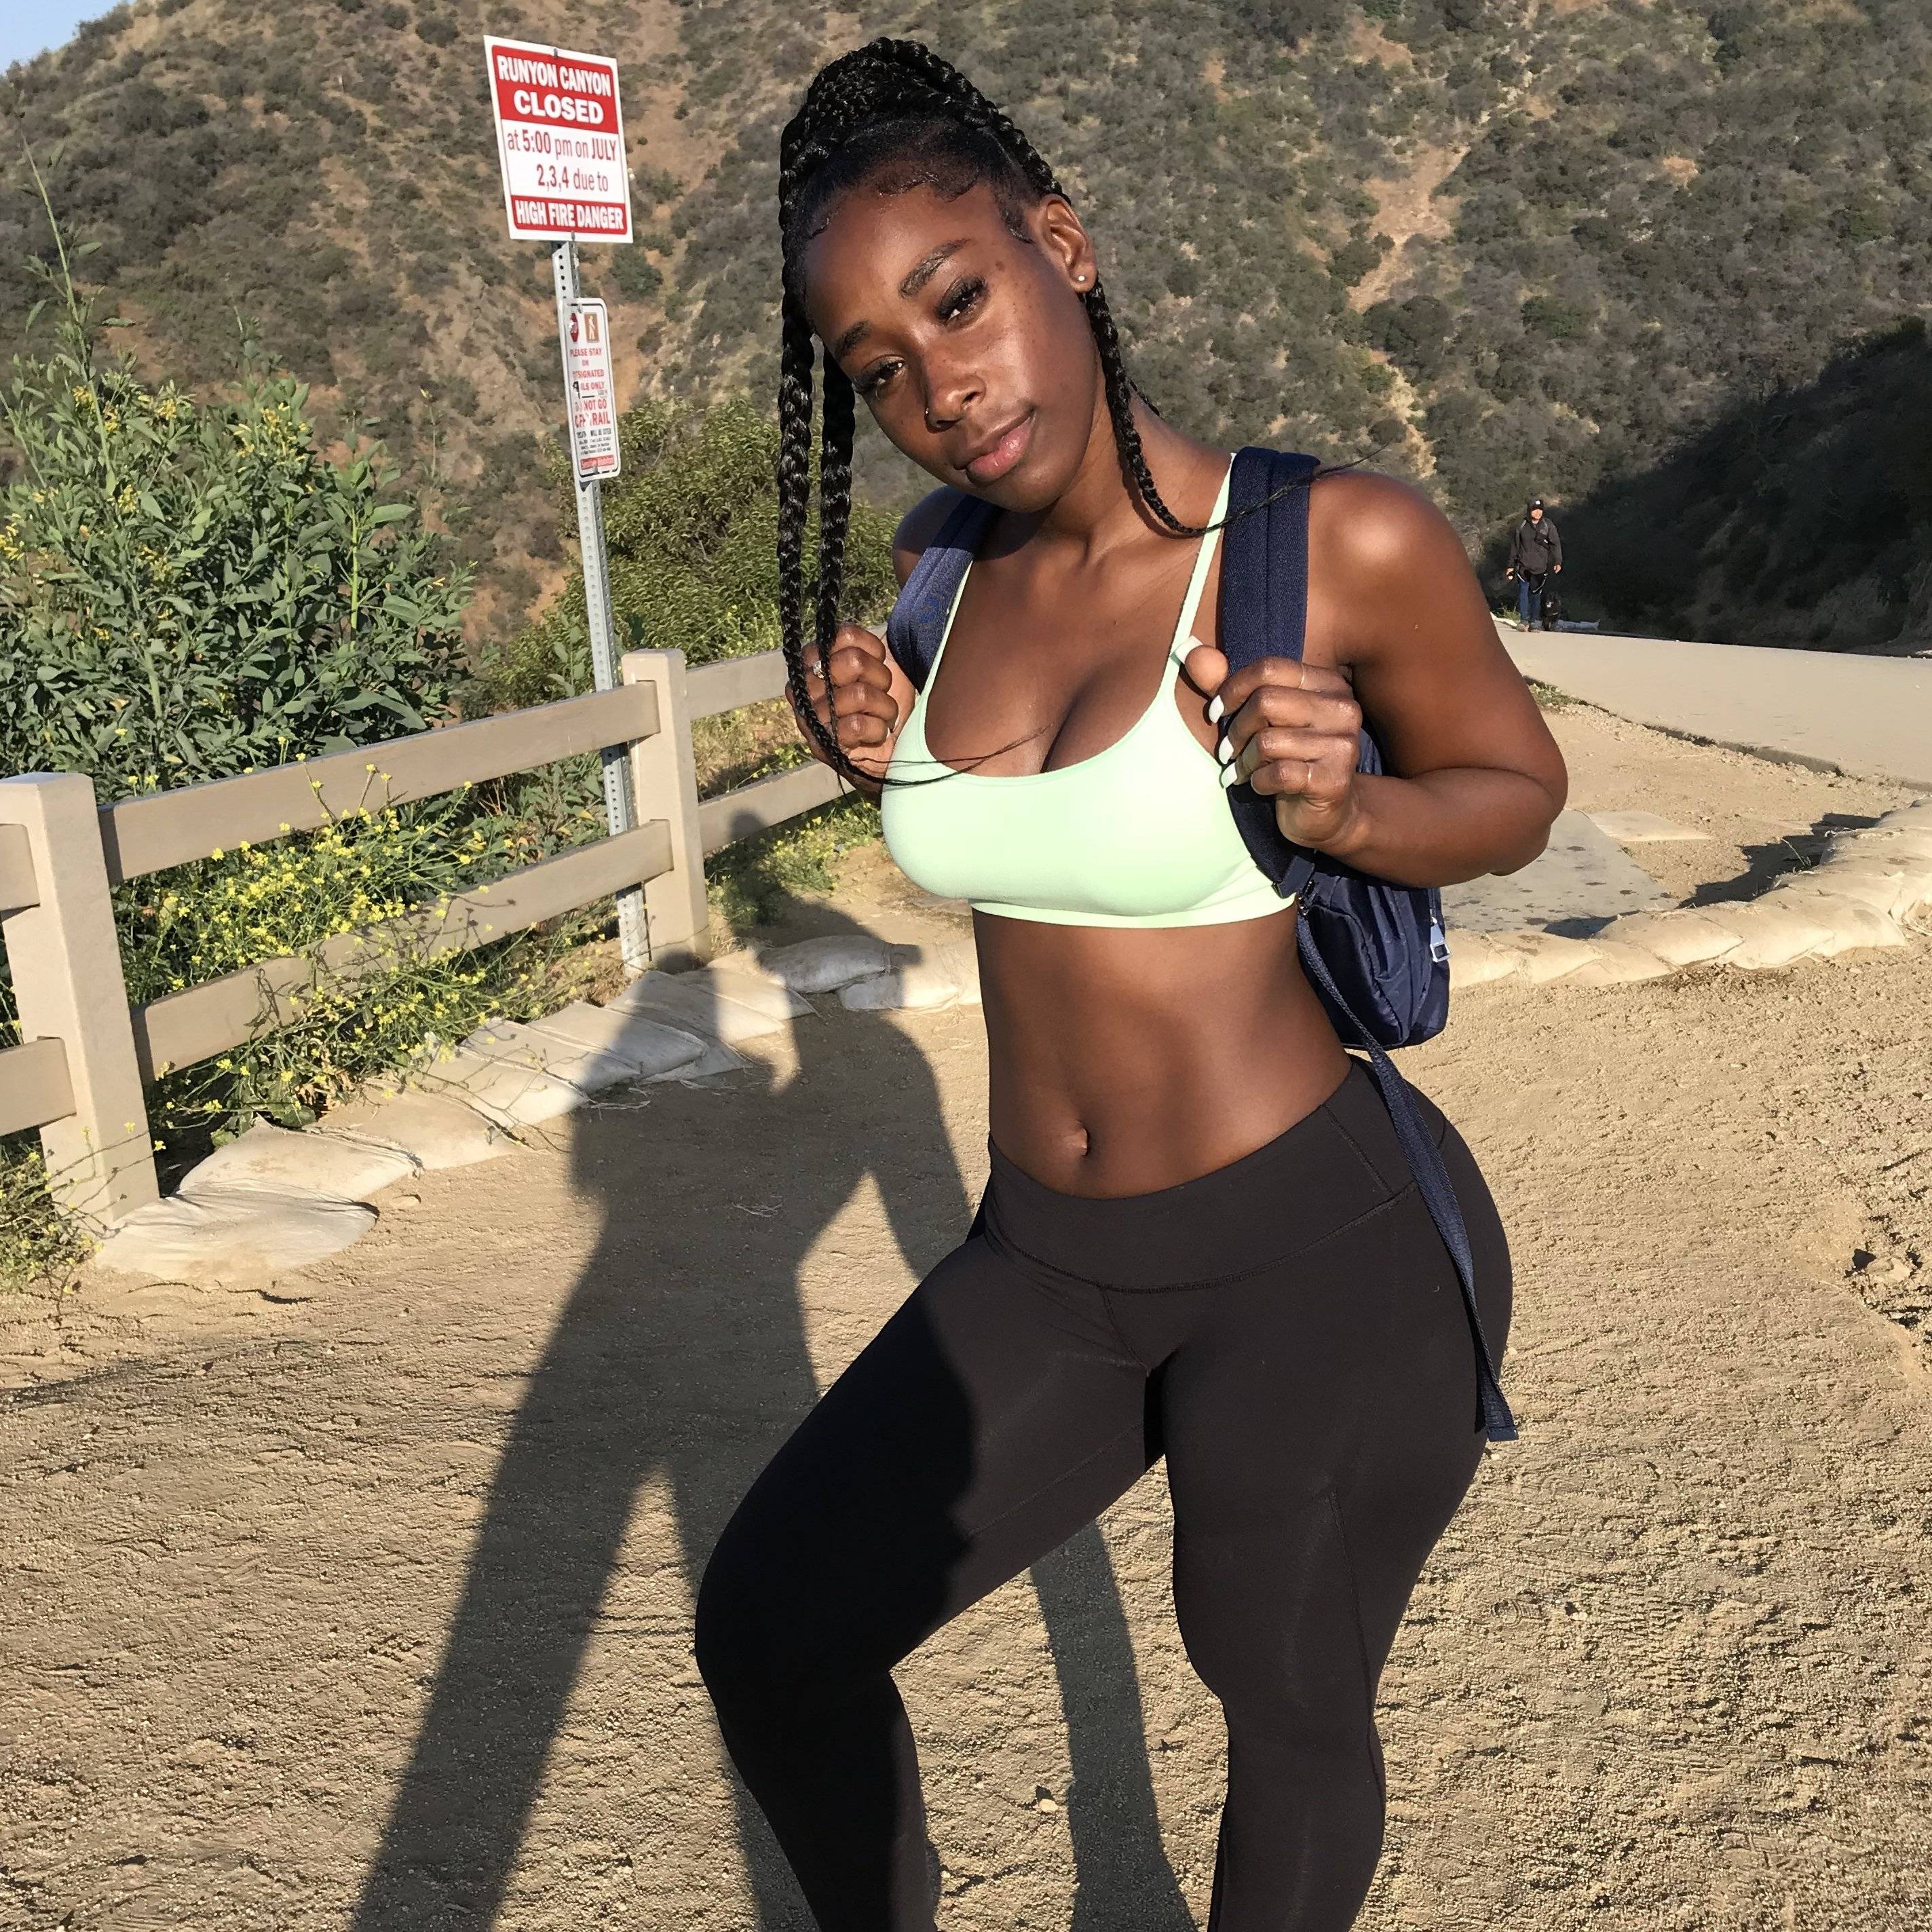 Bria Myles Wallpapers